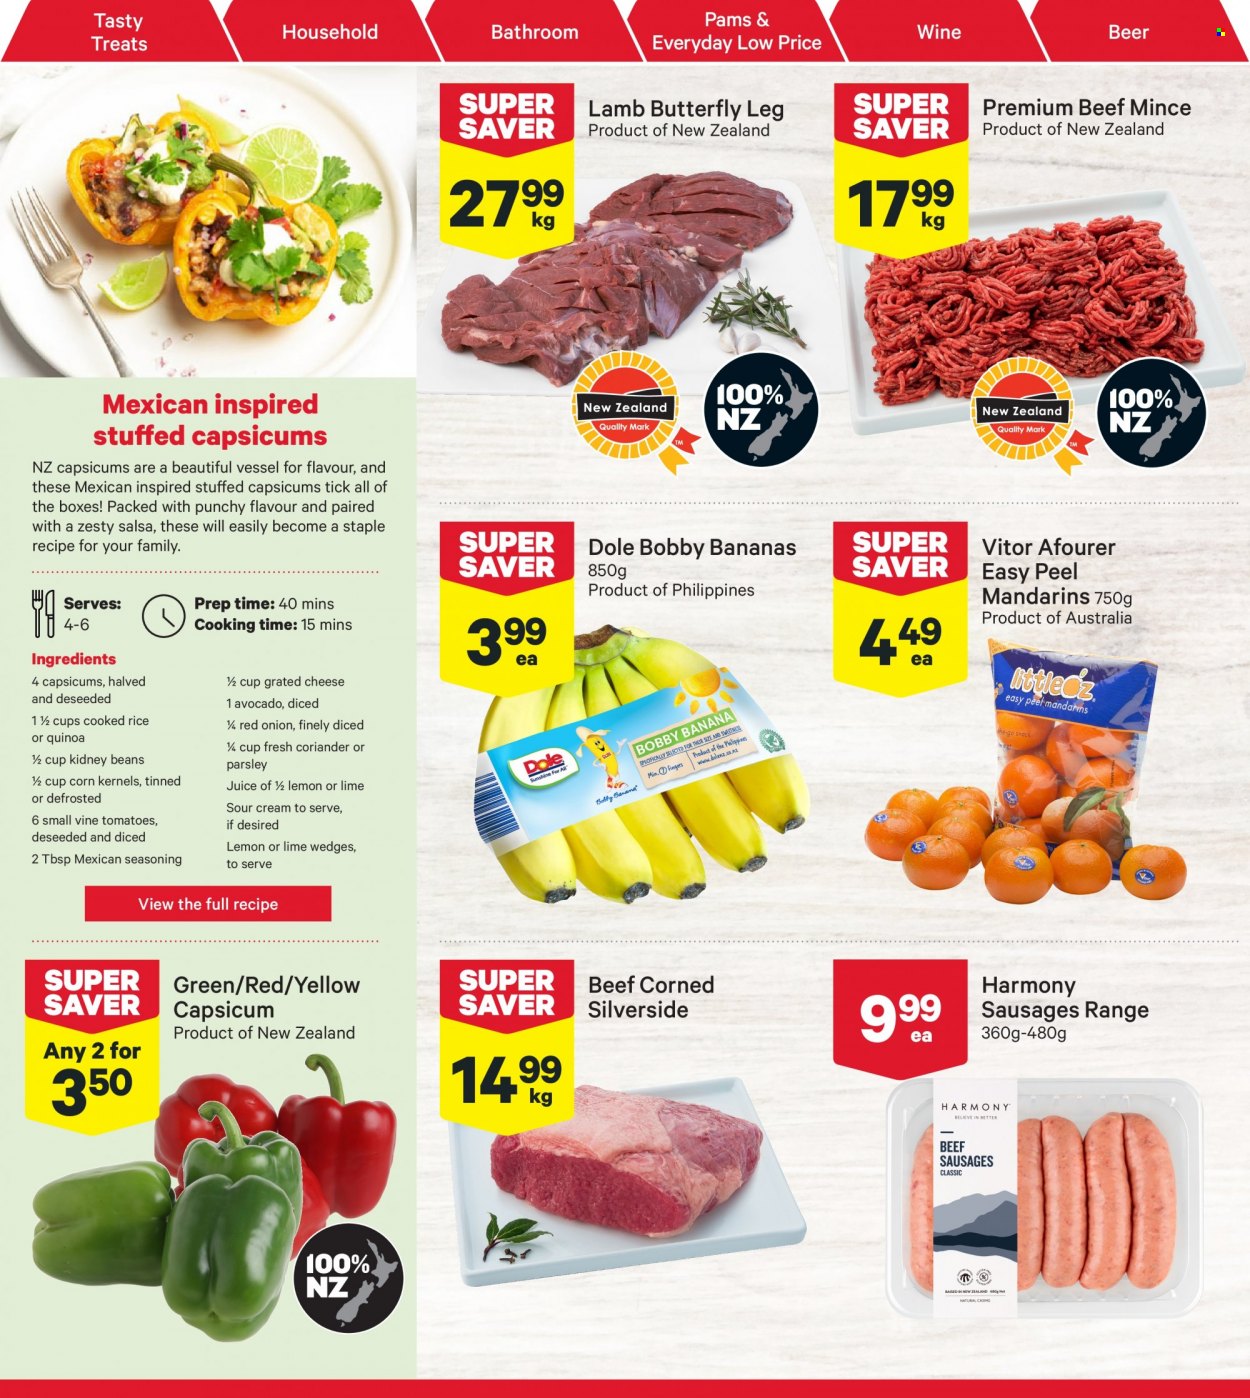 thumbnail - New World mailer - 28.11.2022 - 04.12.2022 - Sales products - parsley, onion, Dole, capsicum, avocado, bananas, mandarines, sausage, cheese, grated cheese, sour cream, kidney beans, quinoa, spice, coriander, salsa, juice, wine, beer, beef meat, ground beef. Page 6.